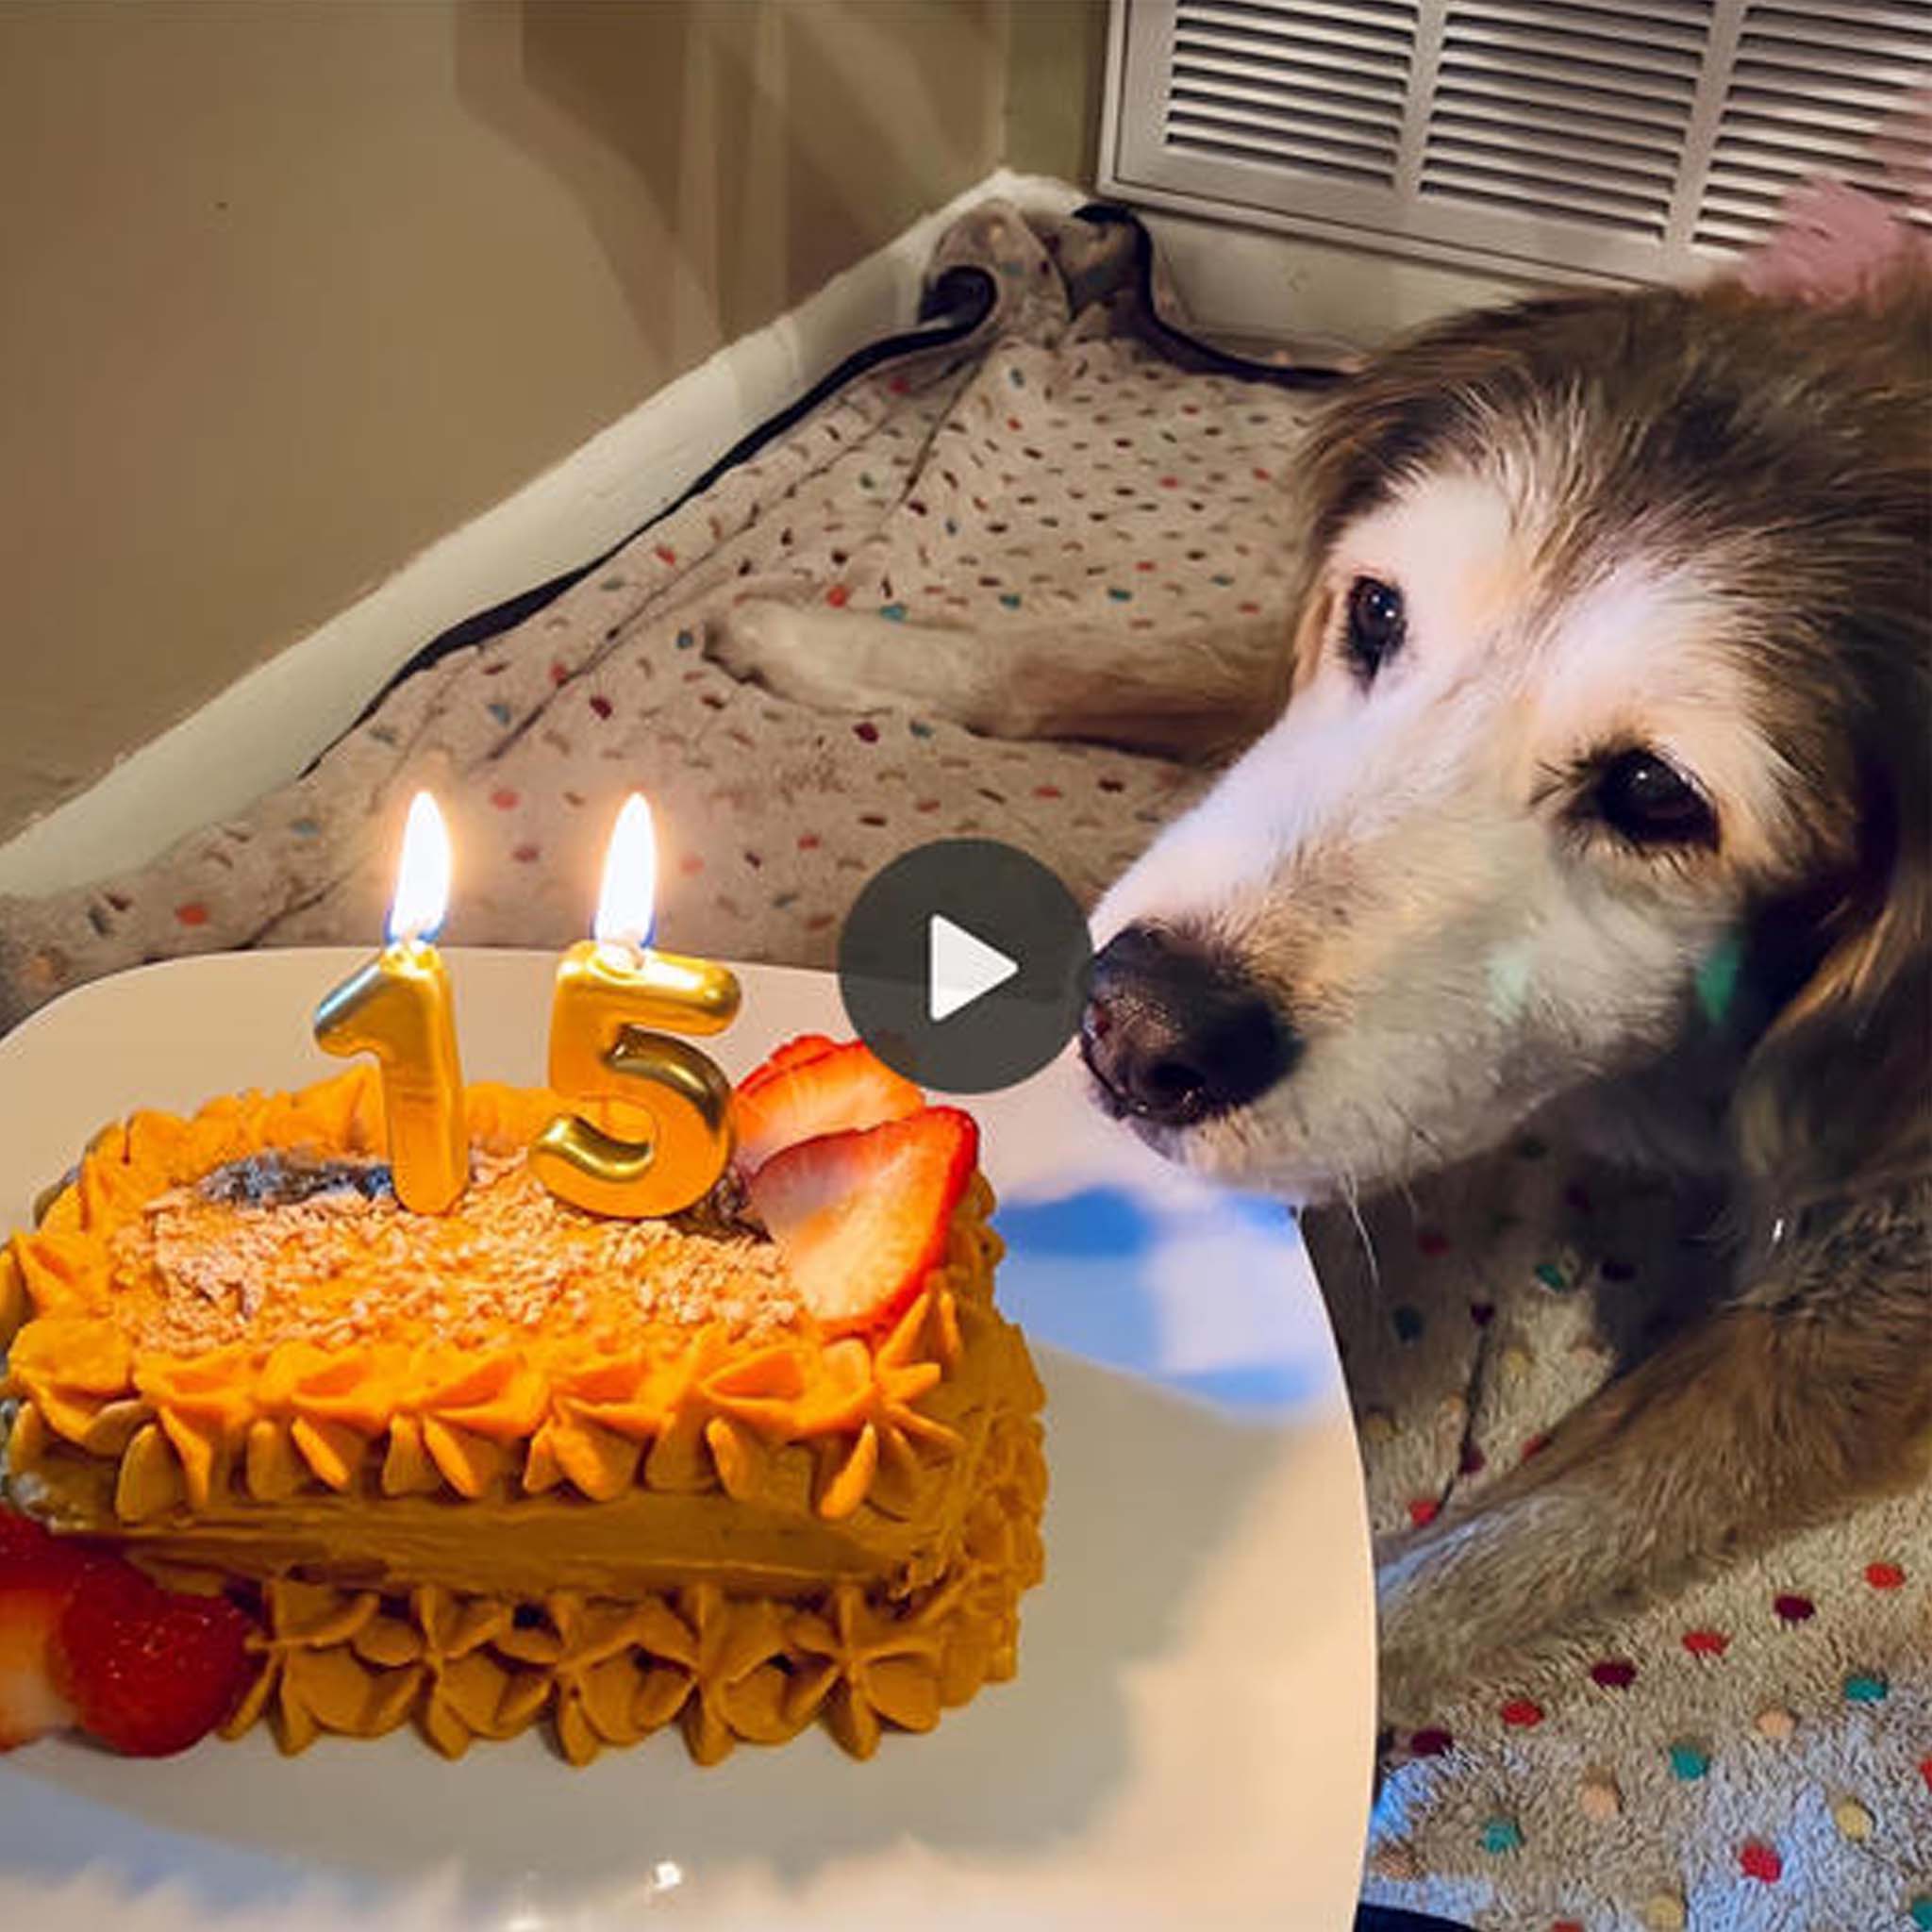 Happy birthday to her! After 15 years, a tear fell on the dog’s face as he finally received a birthday cake, a moment of pure joy and love. ‎